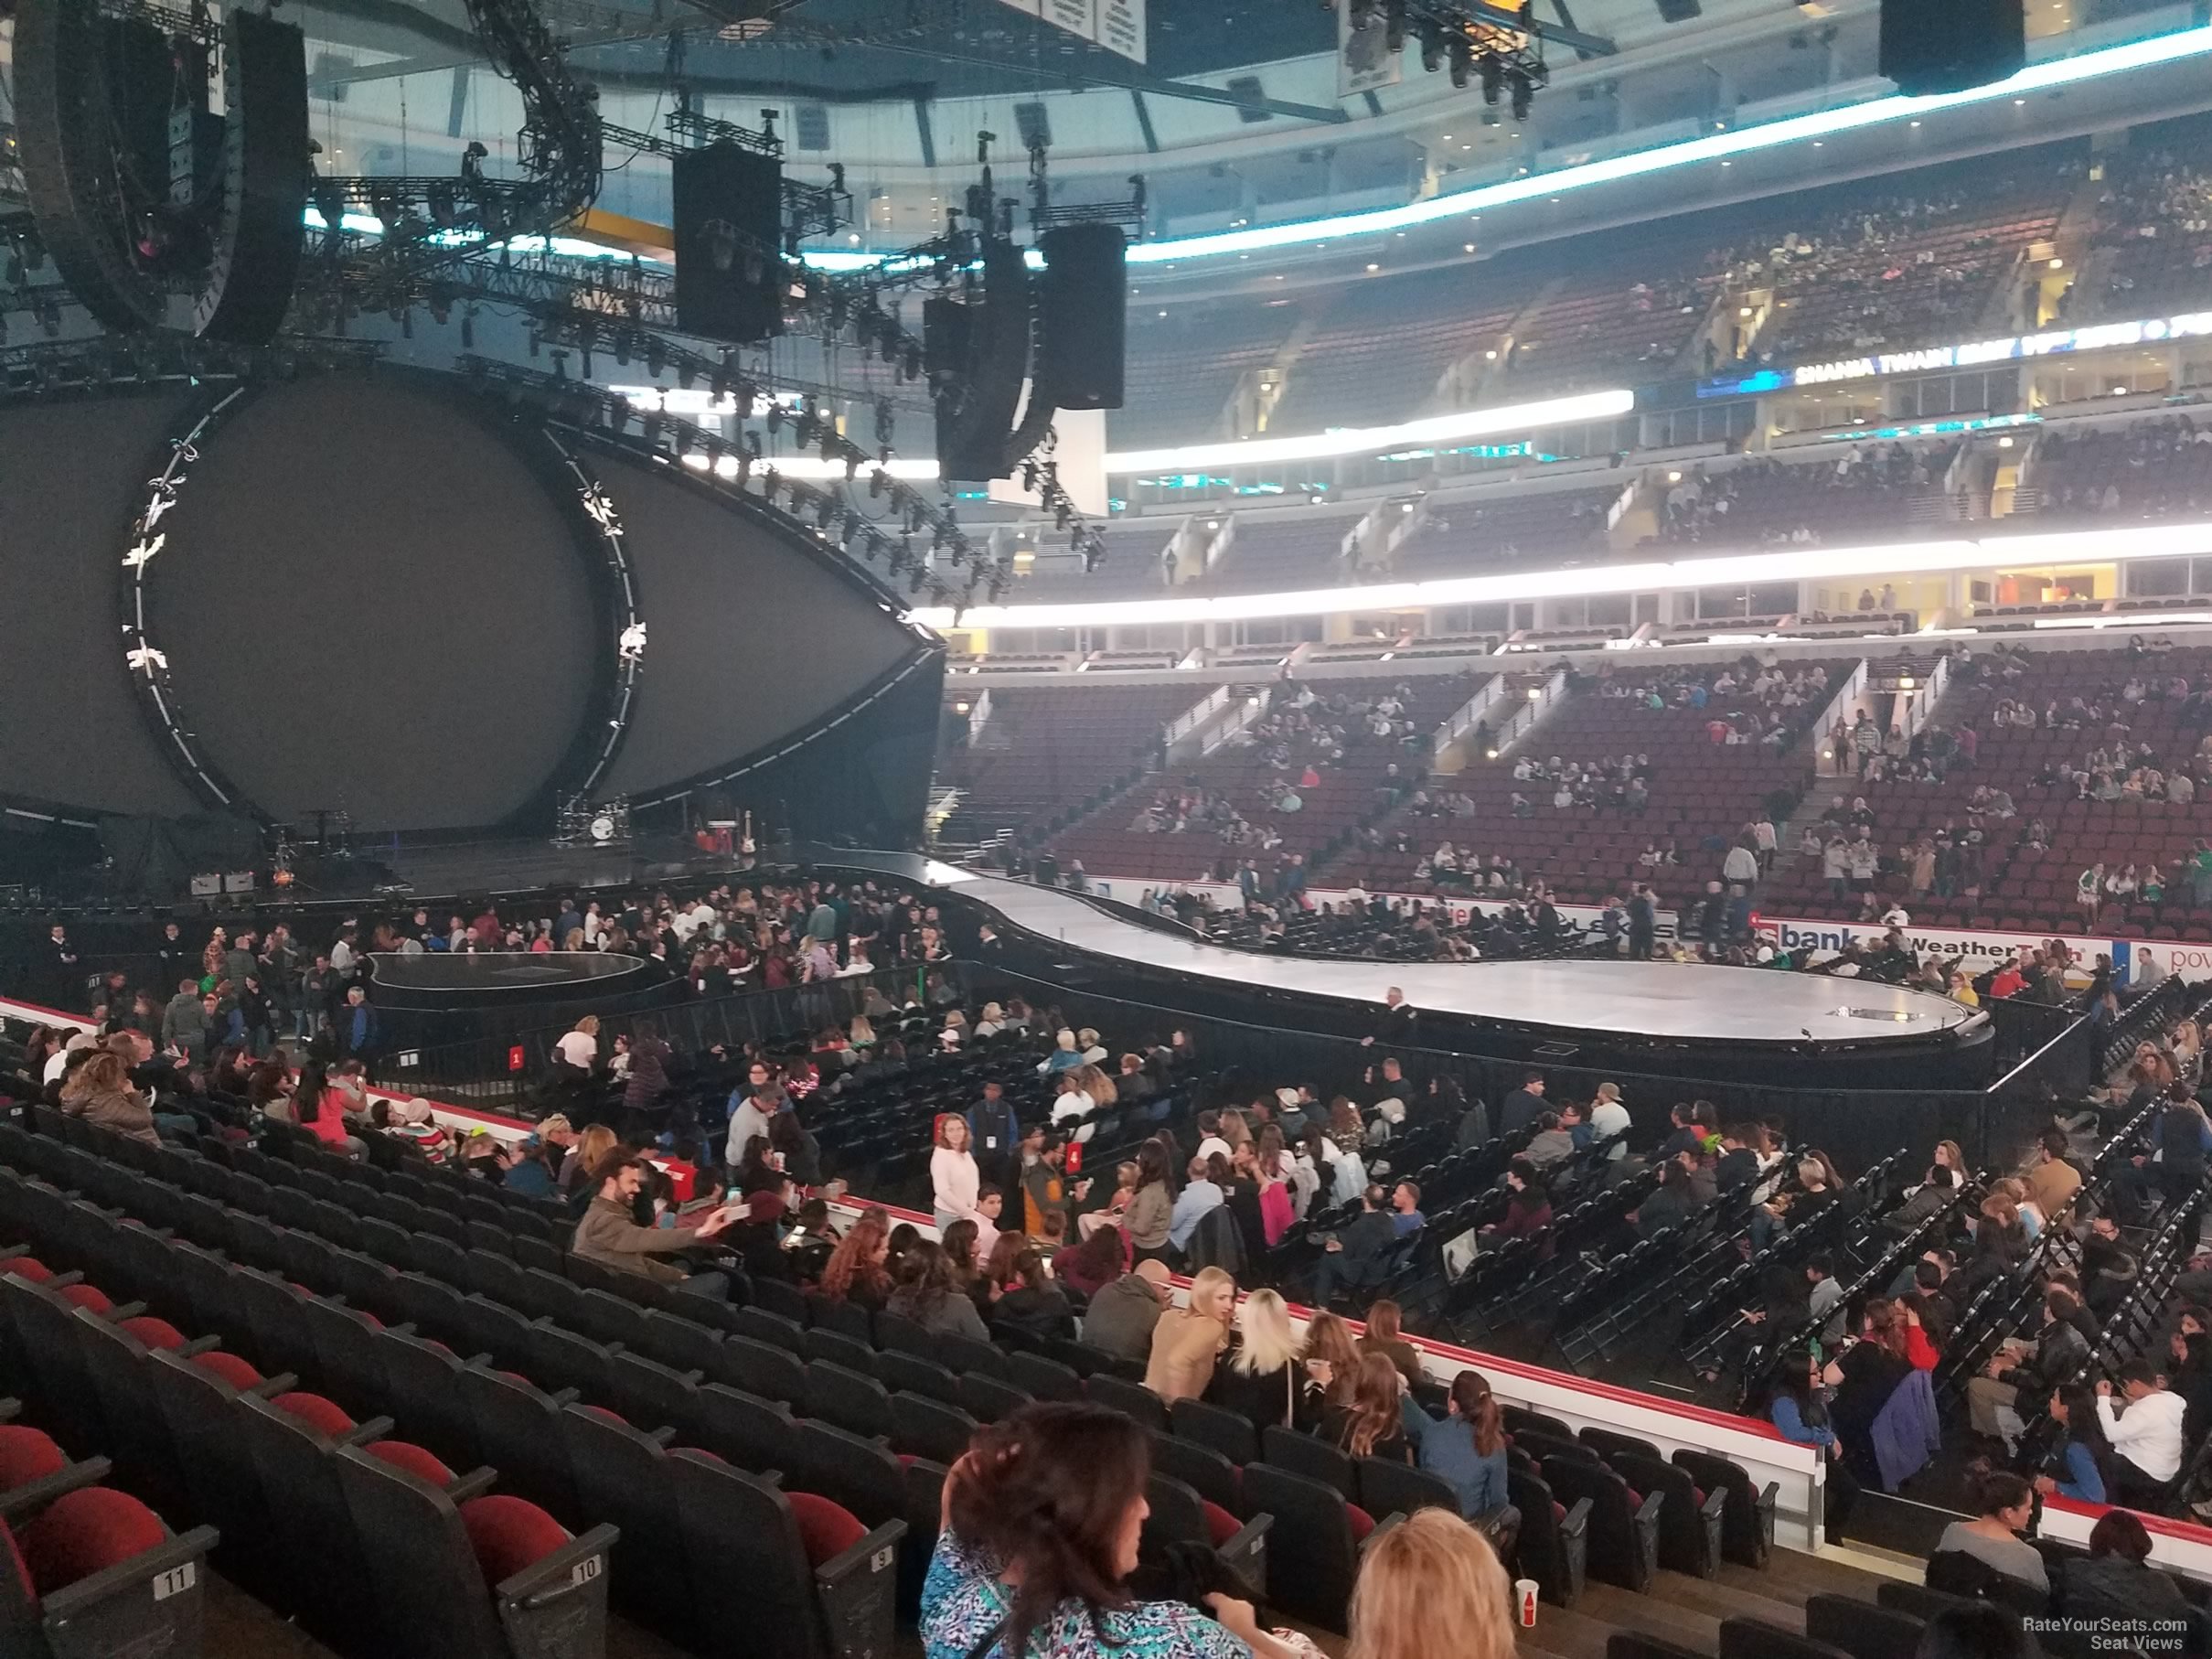 section 110, row 12 seat view  for concert - united center